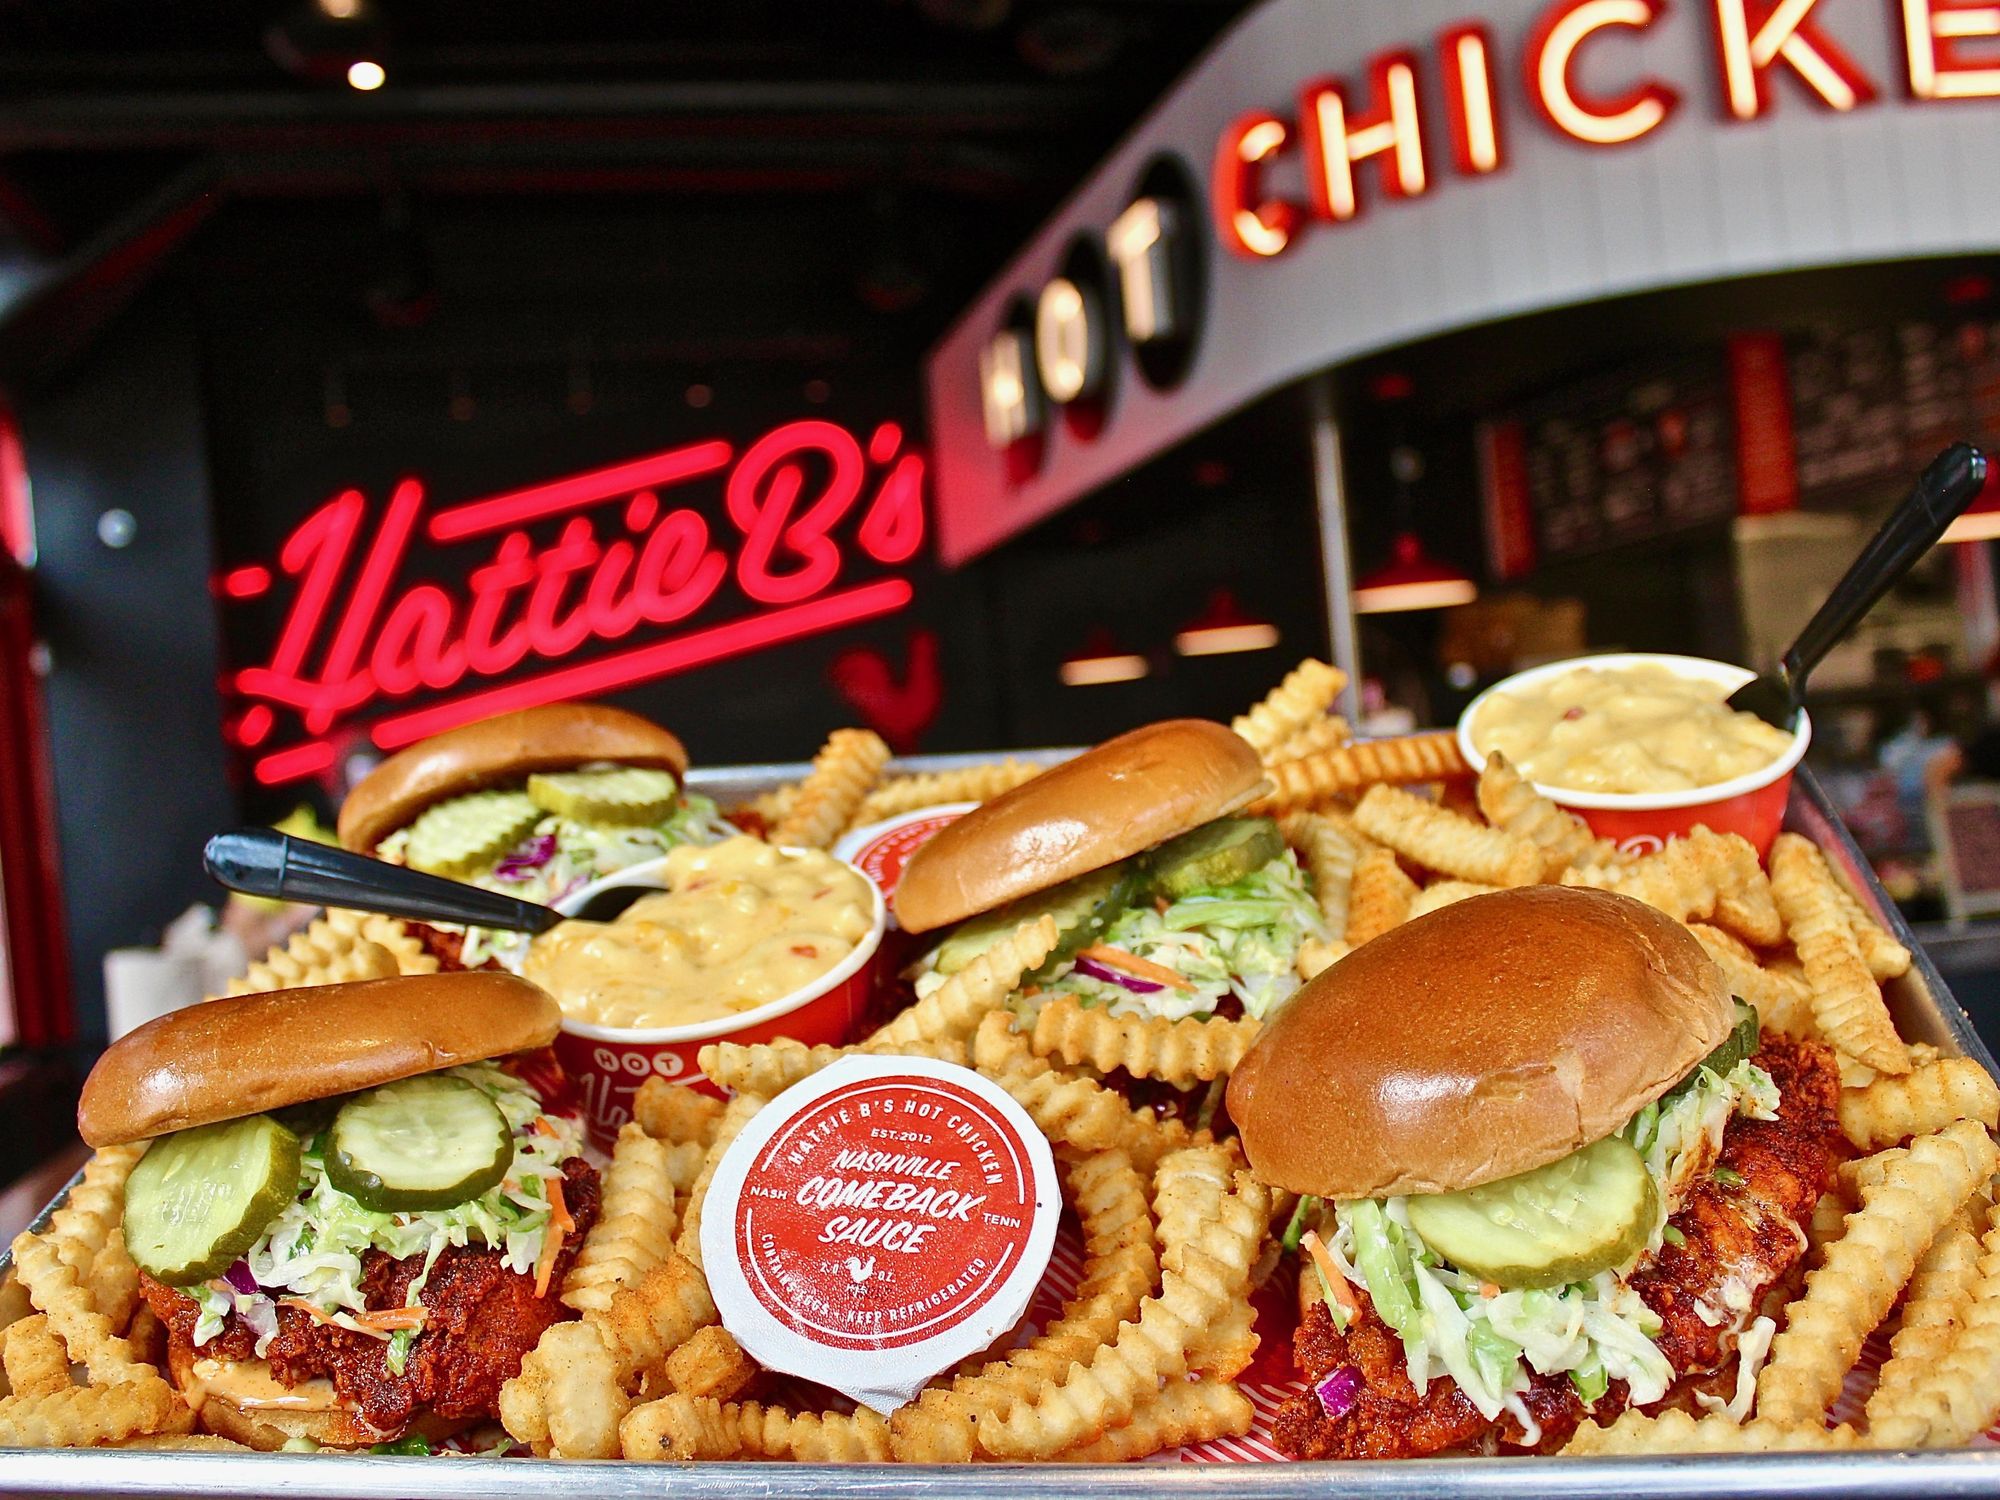 Hot chicken and fries by Hattie B's, coming to Austin.